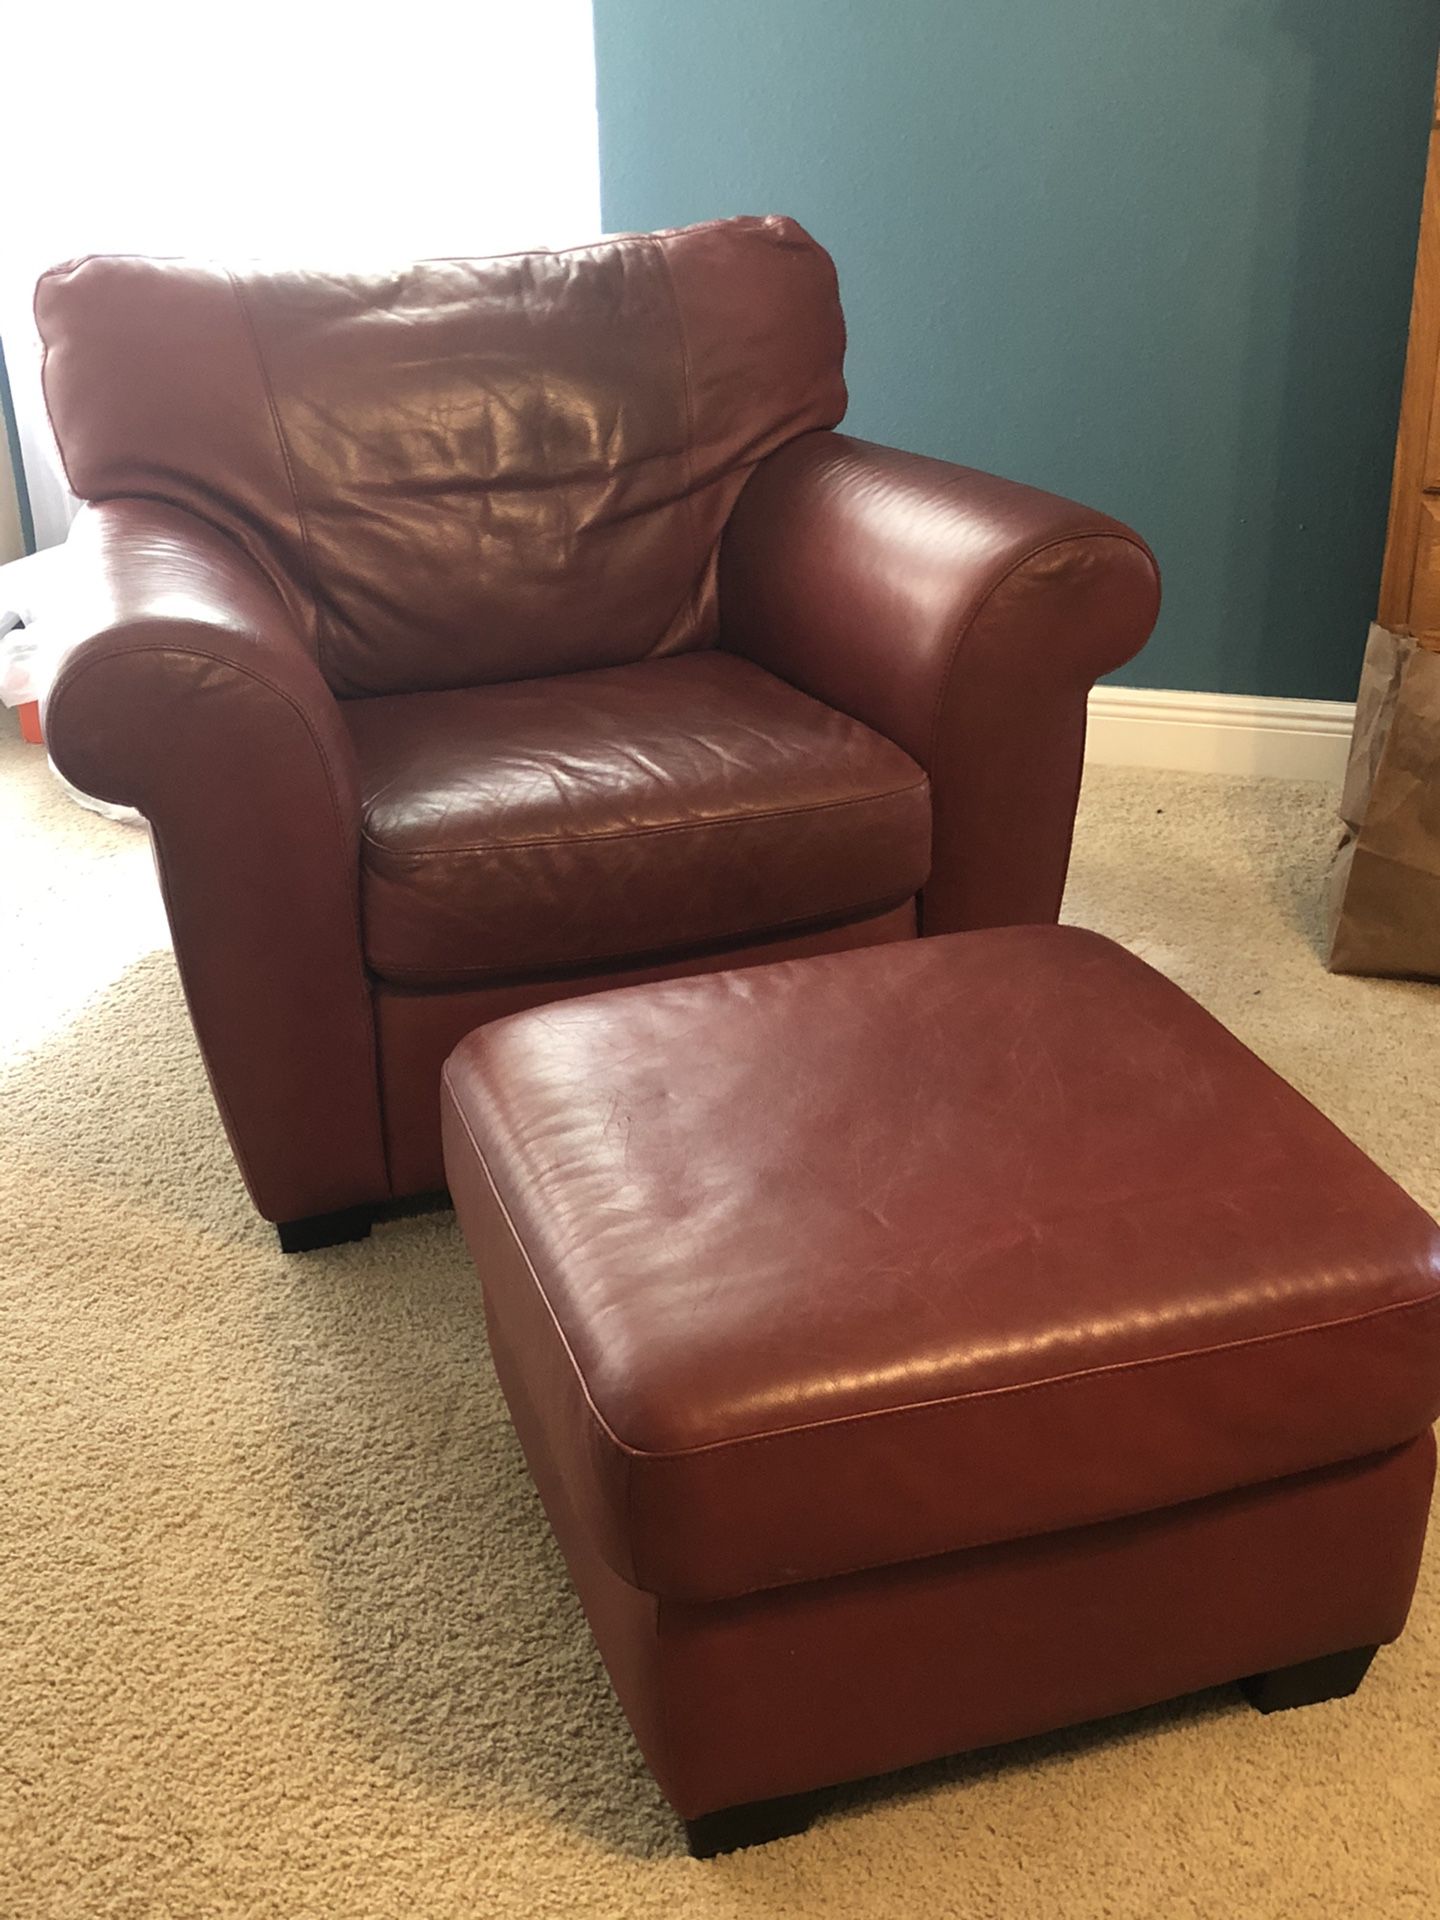 Natuzzi distressed leather chair and ottoman.